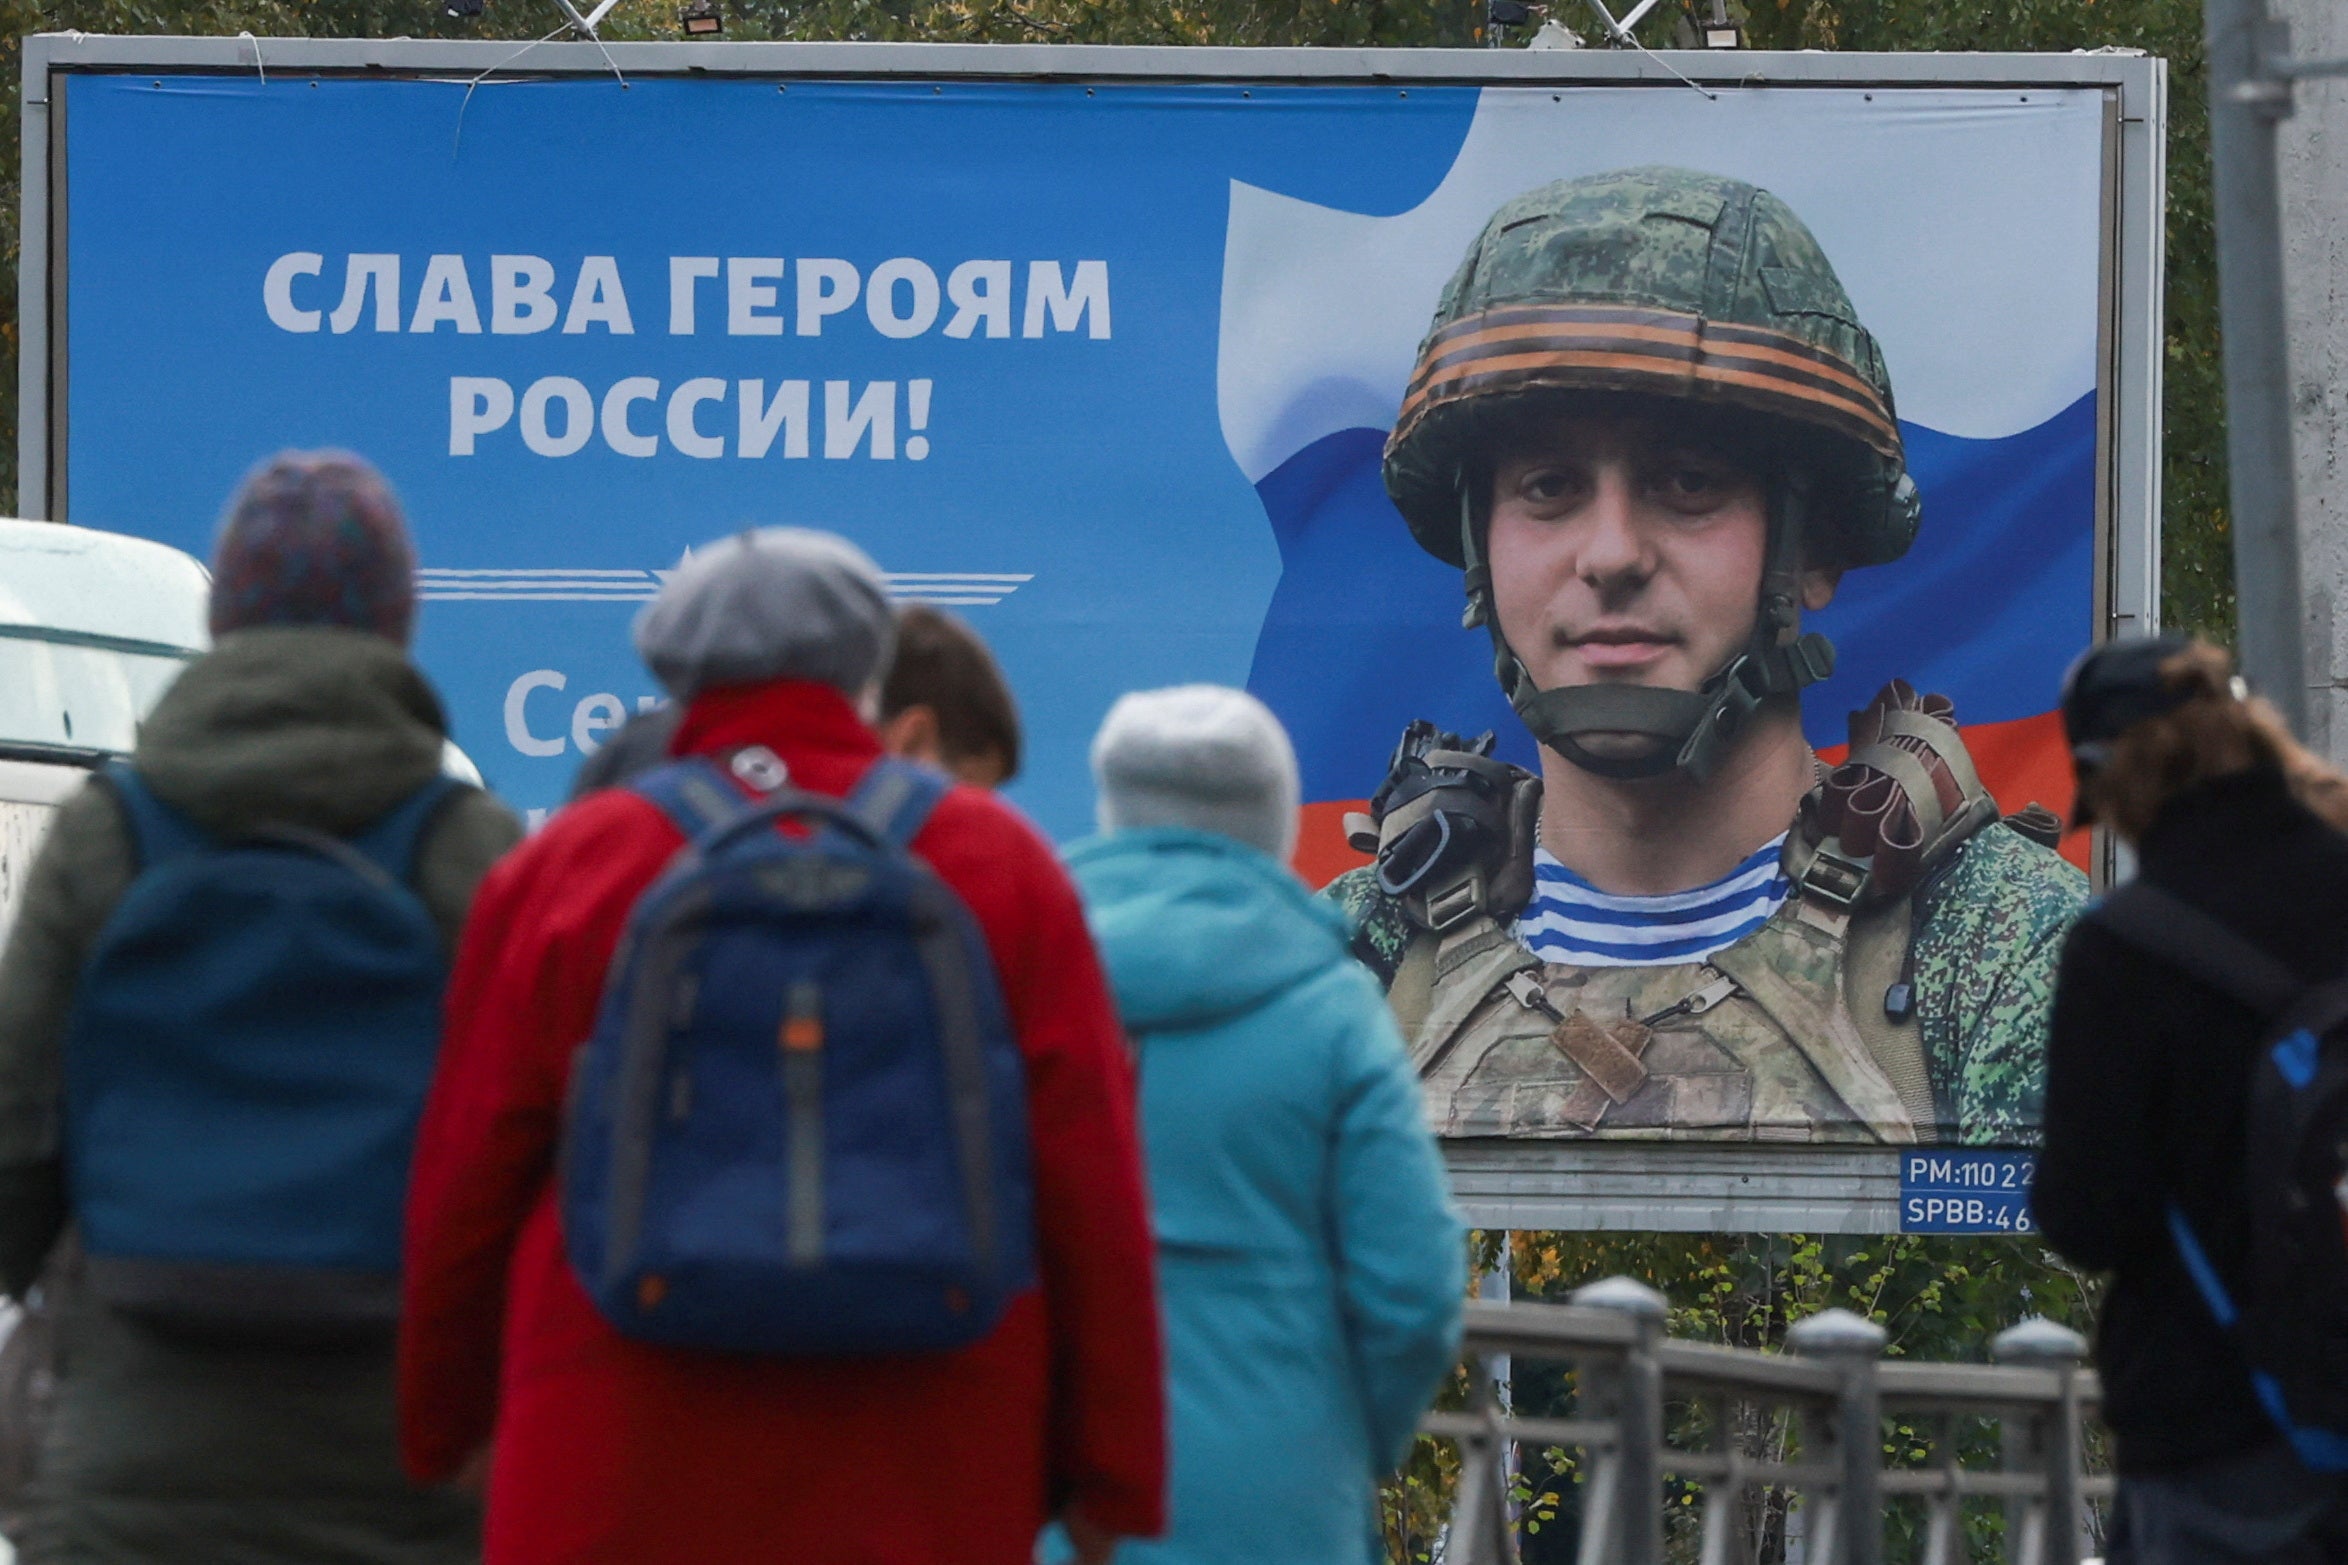 People gather at a tram stop in front of a board displaying a portrait of Russian service member Sergei Tserkovniy in Saint Petersburg, Russia September 21, 2022. A slogan on the board reads: "Glory to heroes of Russia!"